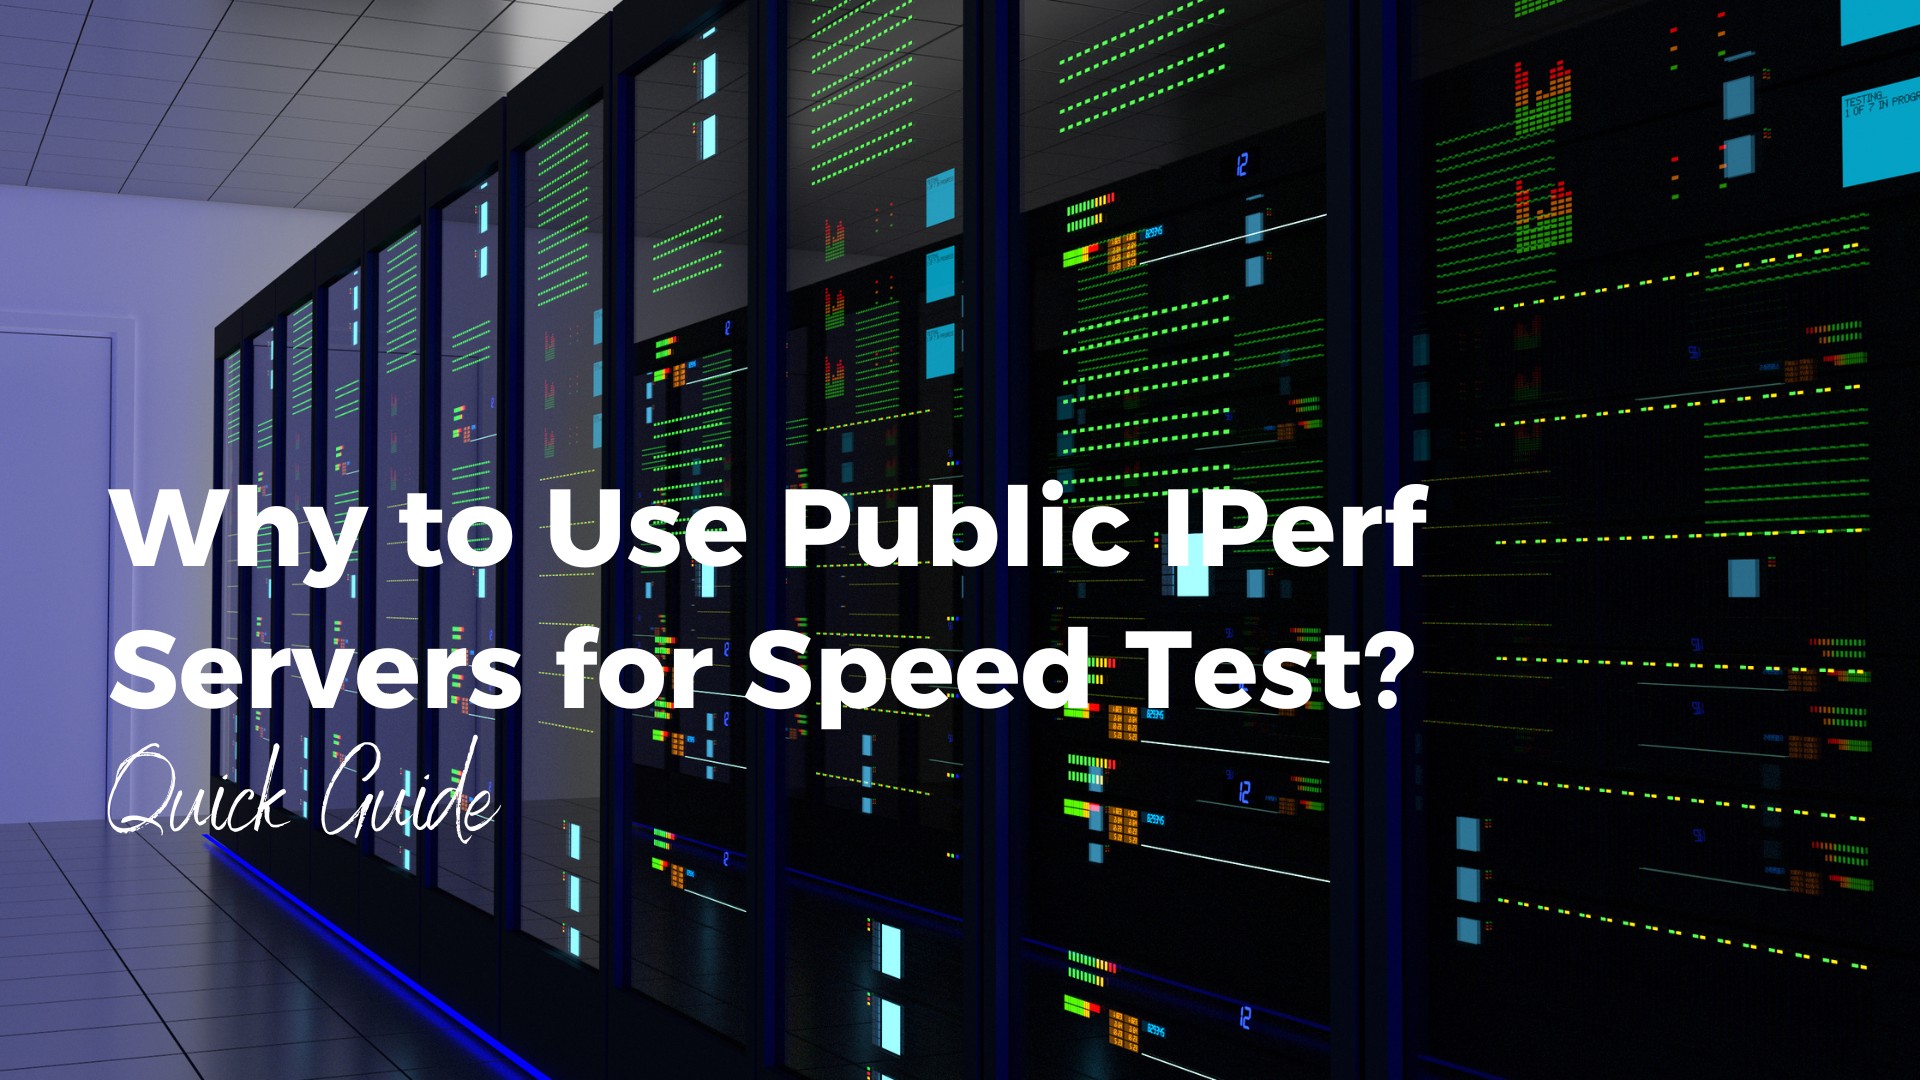 Why to Use Public IPerf Servers for Speed Test?